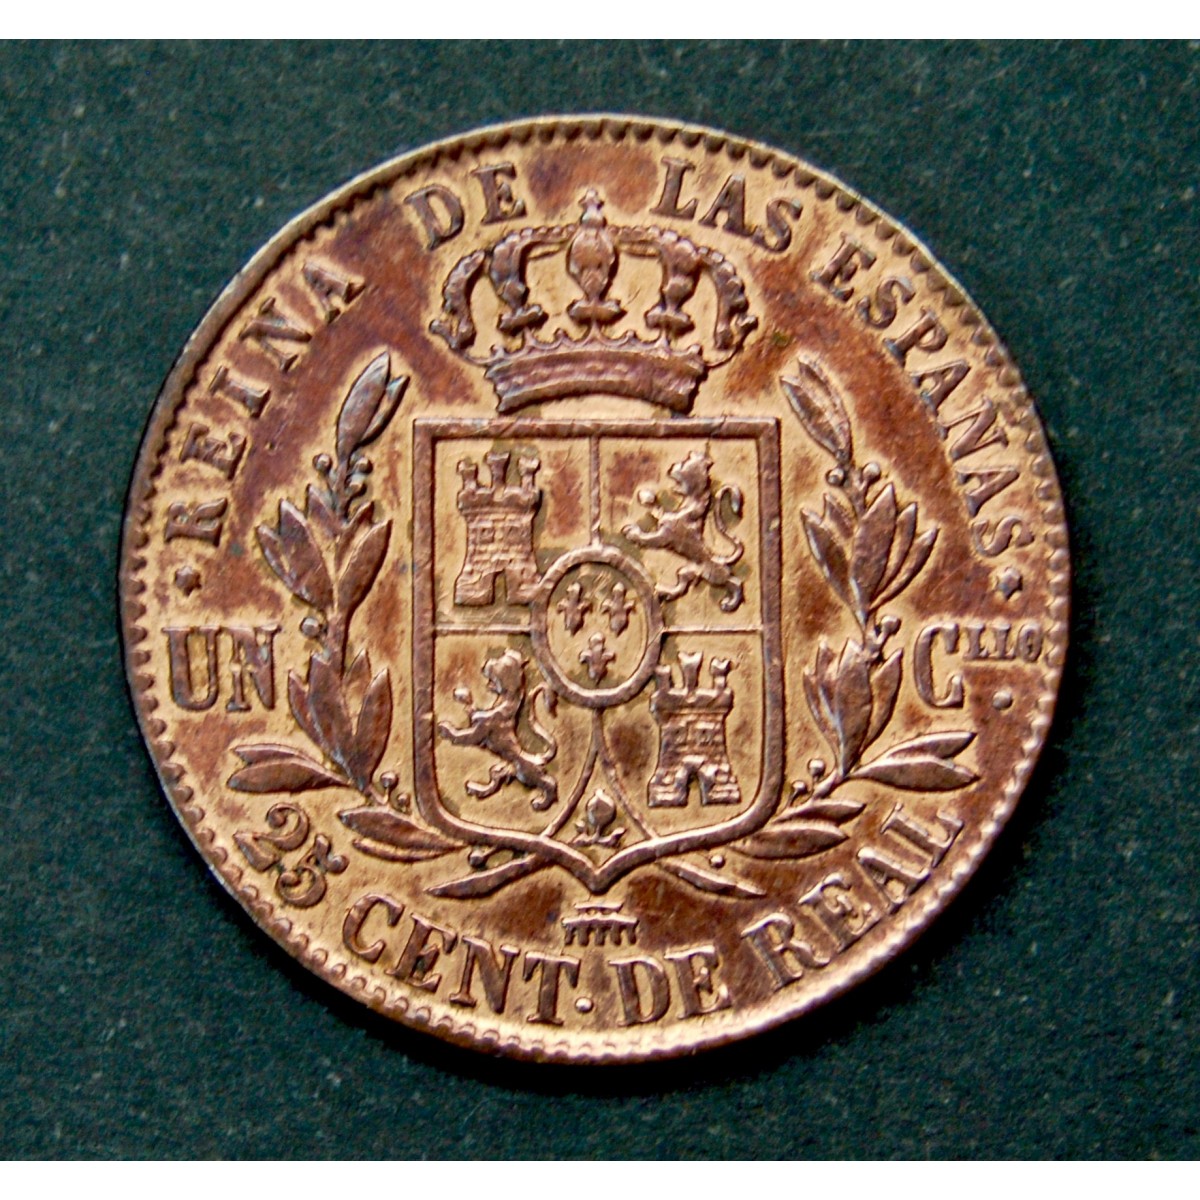 Spanish Isabeline coin of 25 cents of the year 1863